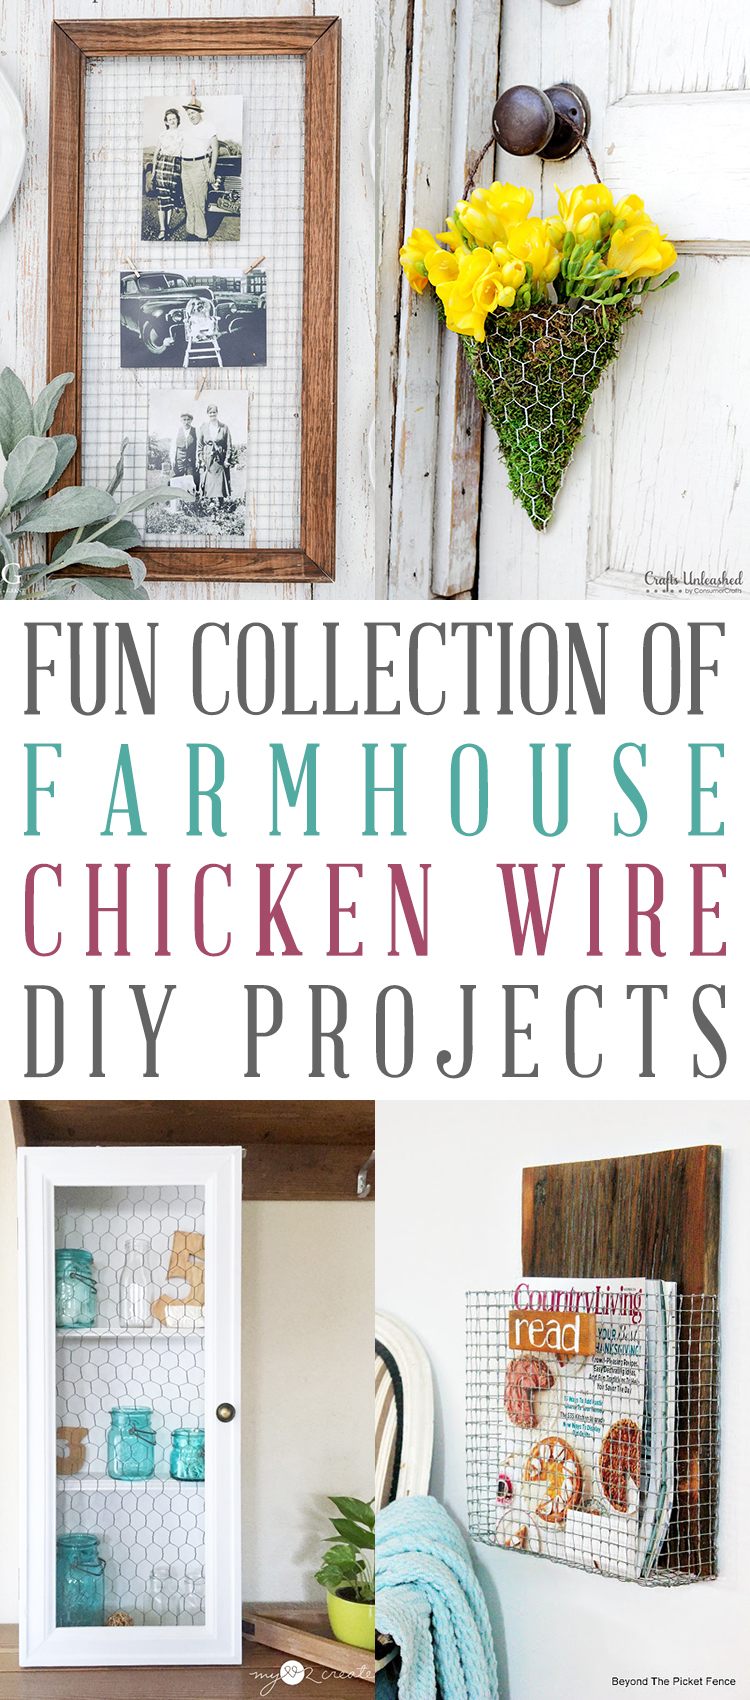 The New Year is almost here so why not think about some fresh Farmhouse Decor Ideas and Designs for 2020.  Comfy, Cozy, Friendly and Welcoming is what it is all about.  Here are a few simple ways to add that special Farmhouse Charm.